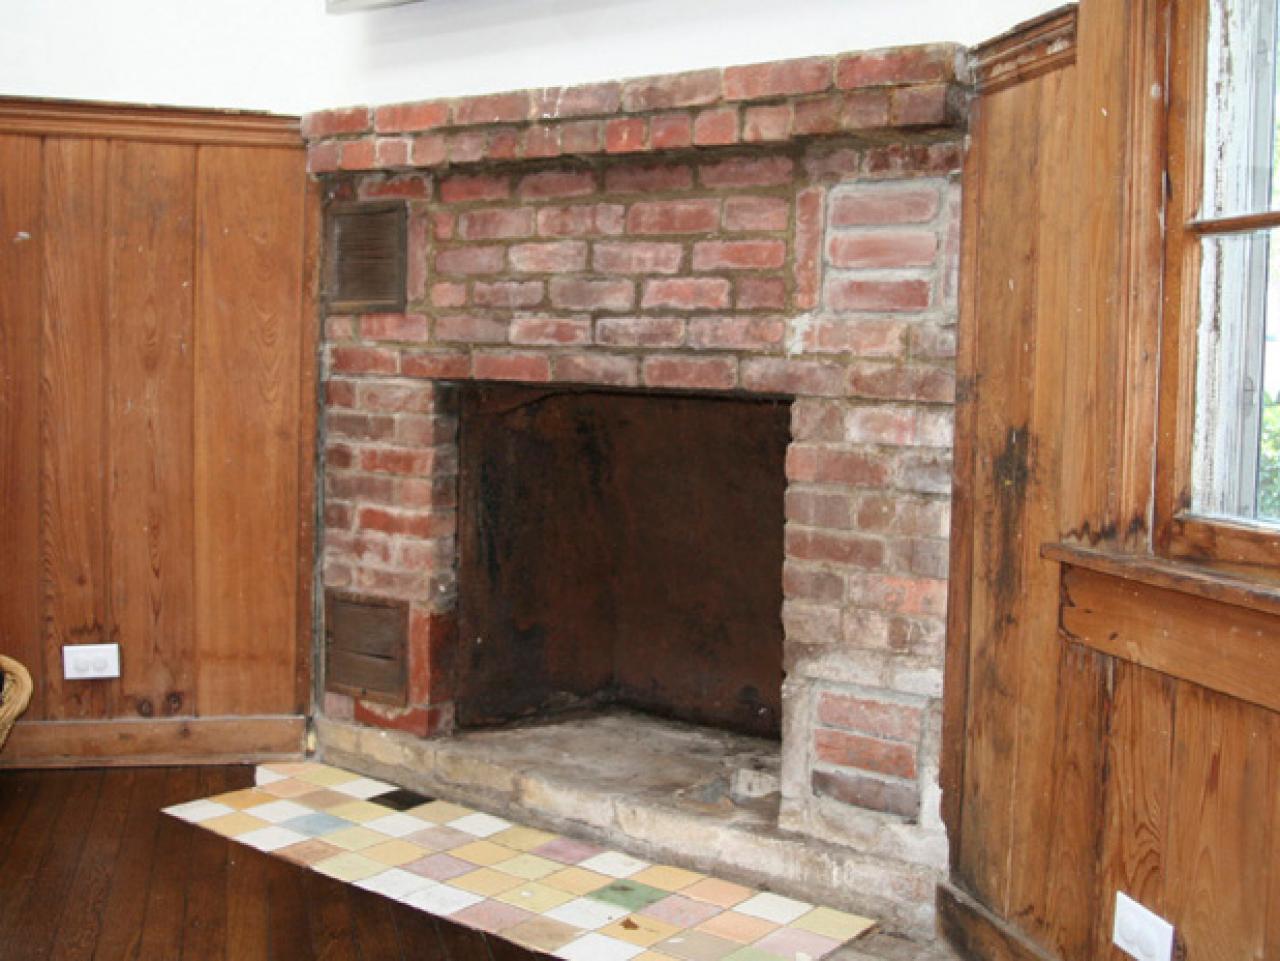 Brick Fireplace With Stone, How To Install Stone Veneer Over Tile Fireplace